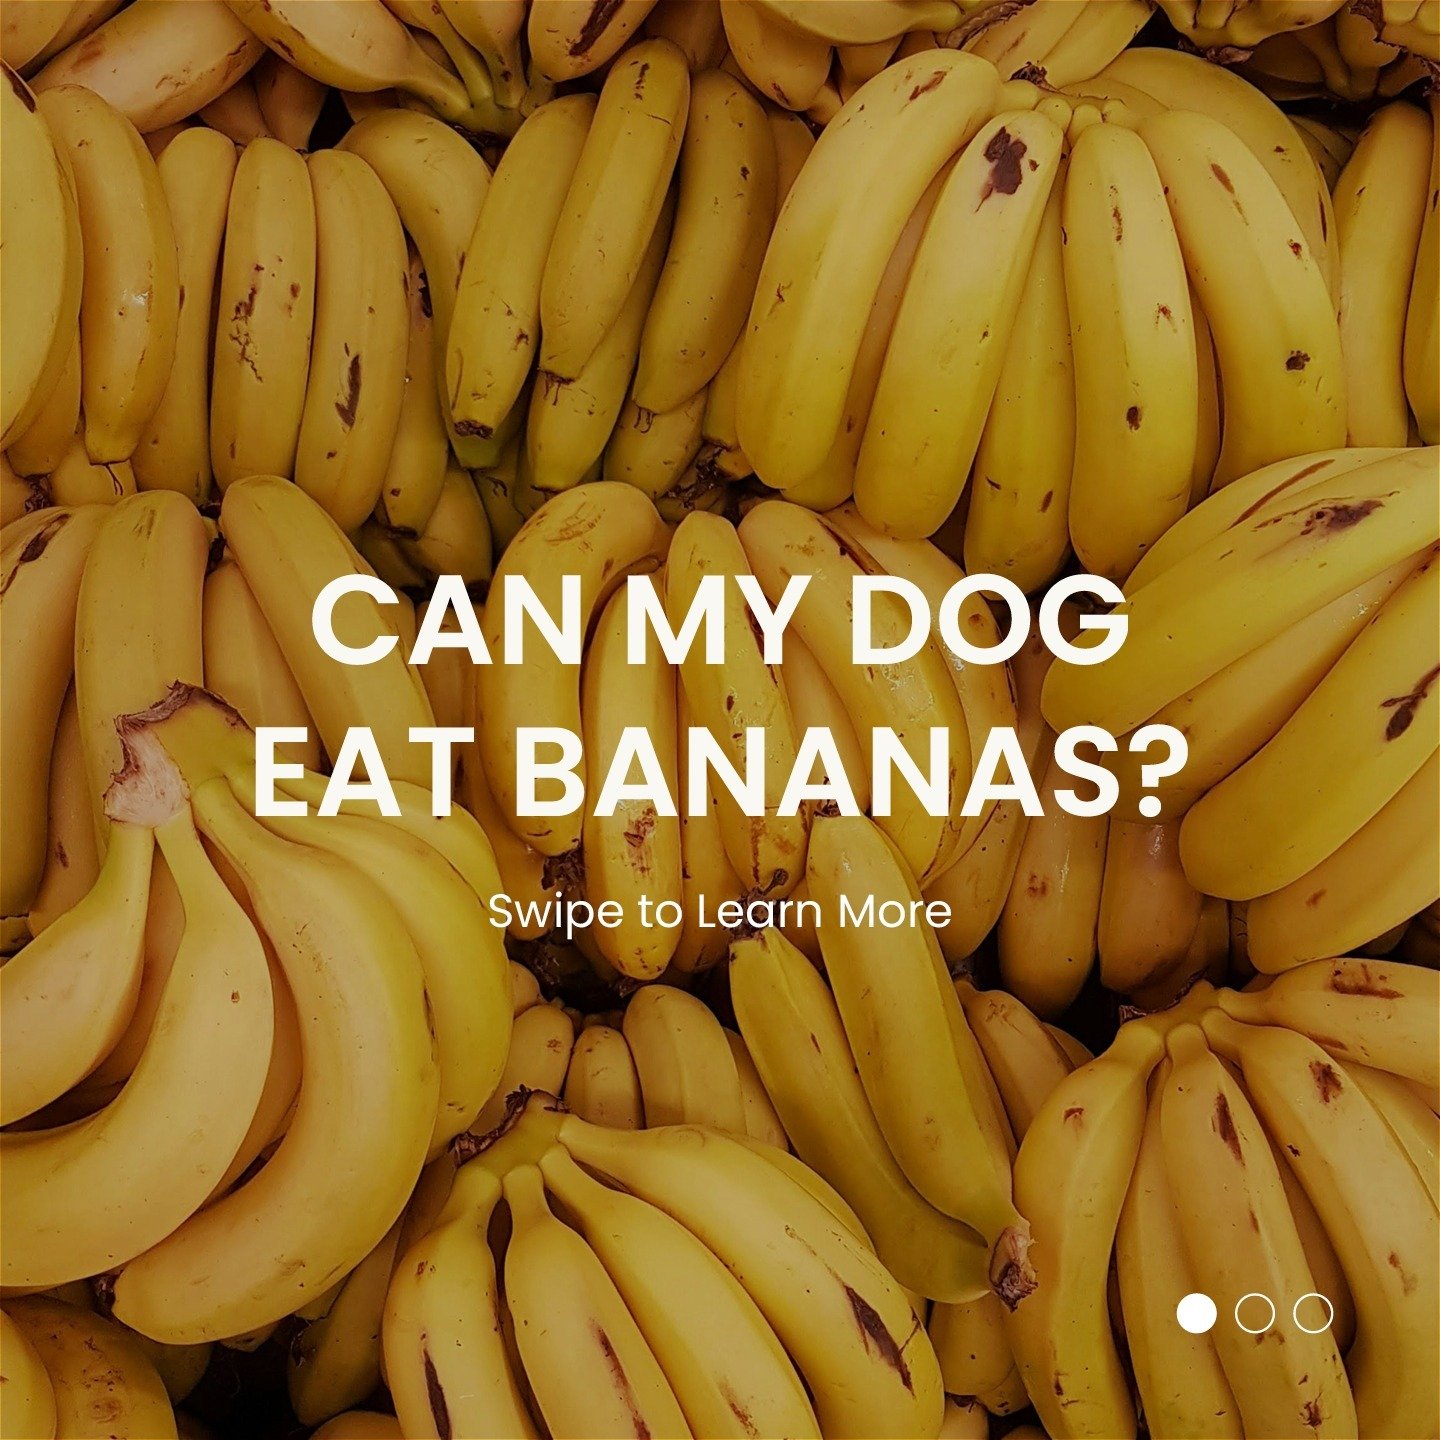 As a tasty and nutritious treat, bananas offer potassium and vitamins, but it's important to remember that too much can upset their stomach 🍌 

Always consult with your vet for the best snack options for your pets!